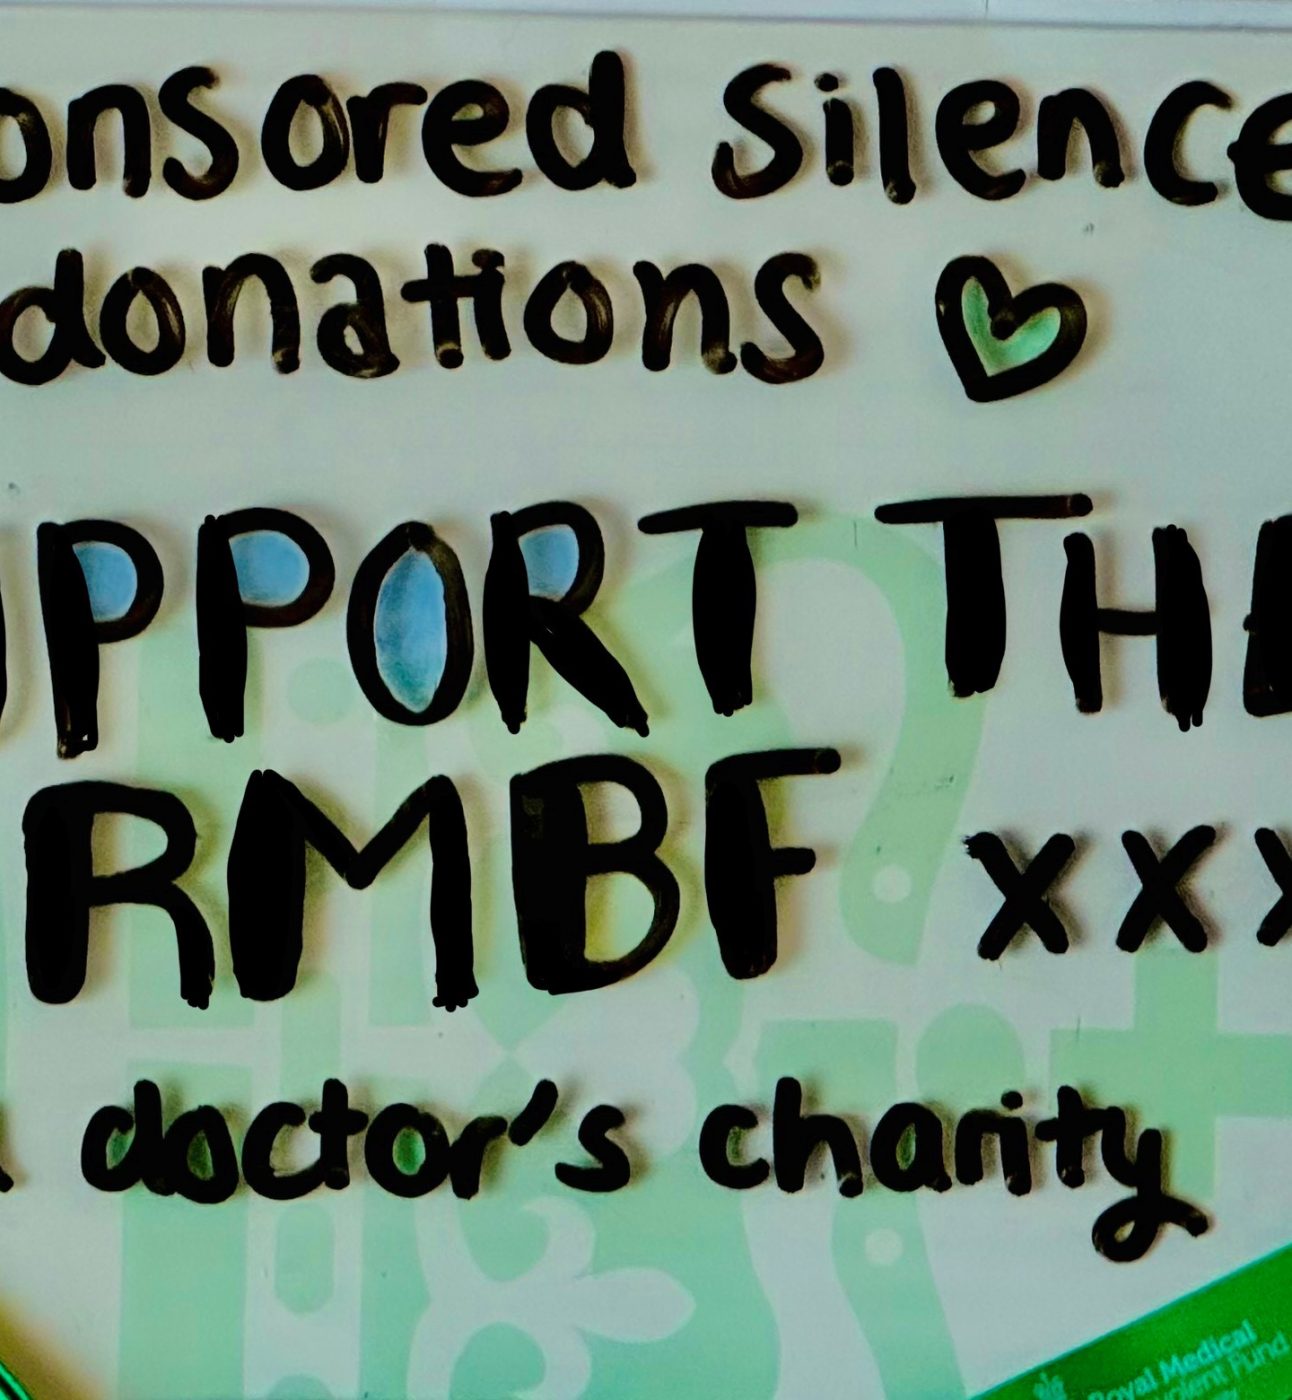 poster saying 'sponsored silence donations - support the rmbf xxx a doctors charity'